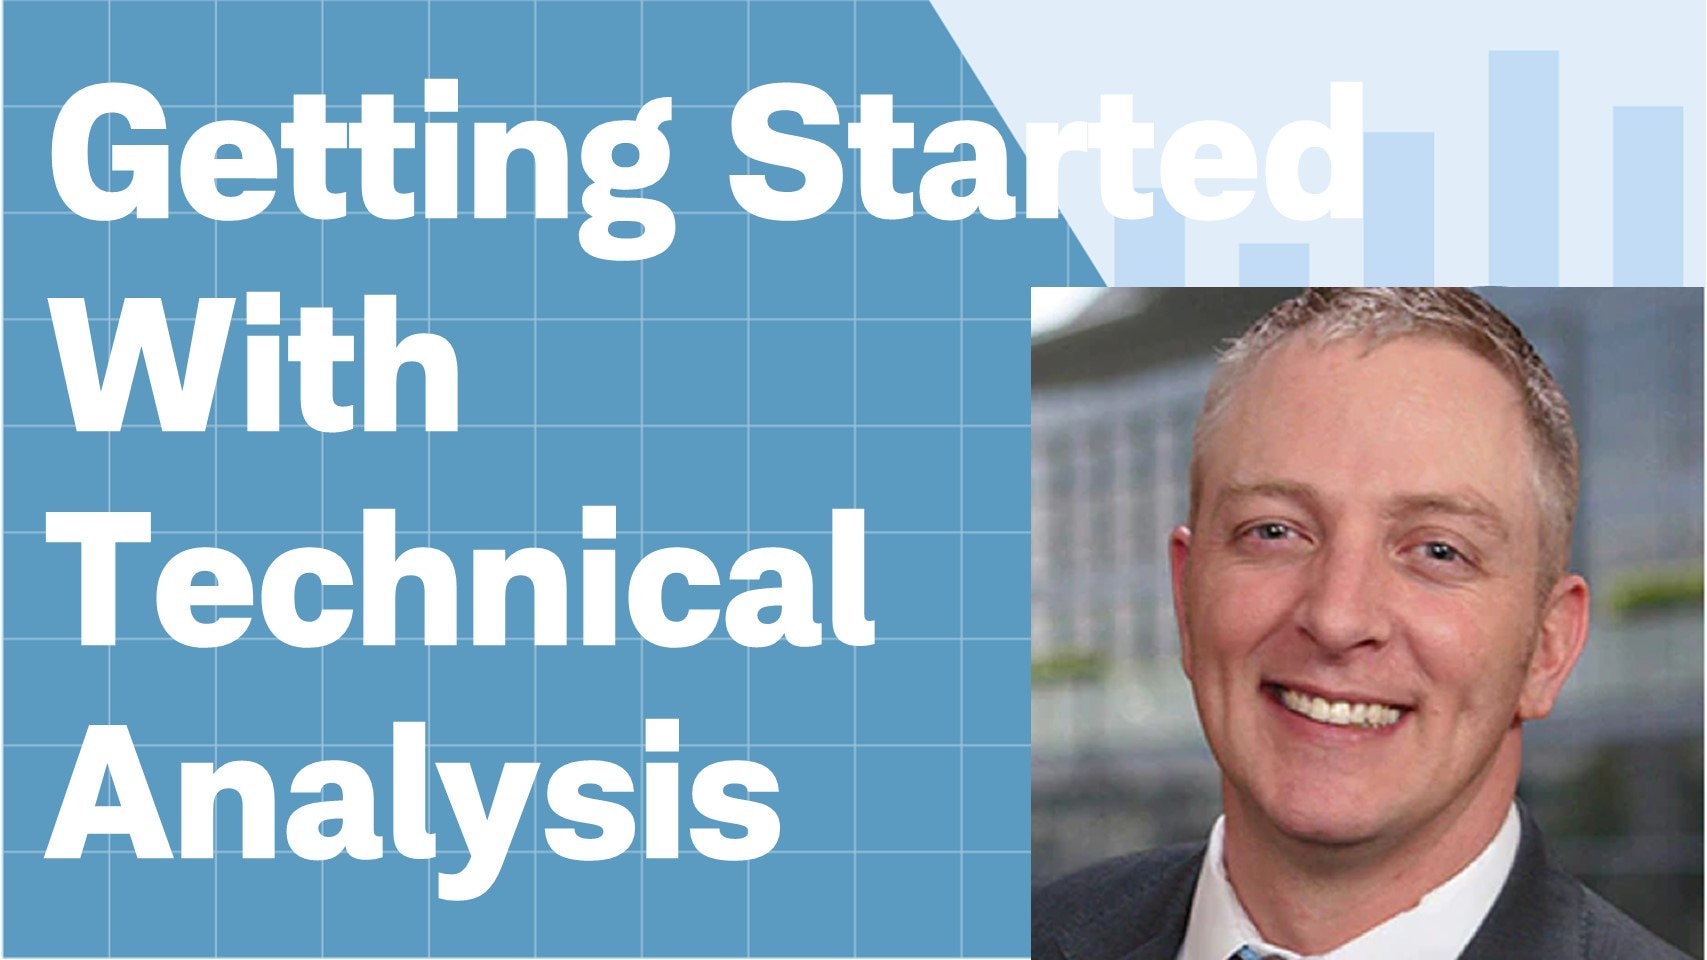 Getting Started with Technical Analysis 6.30